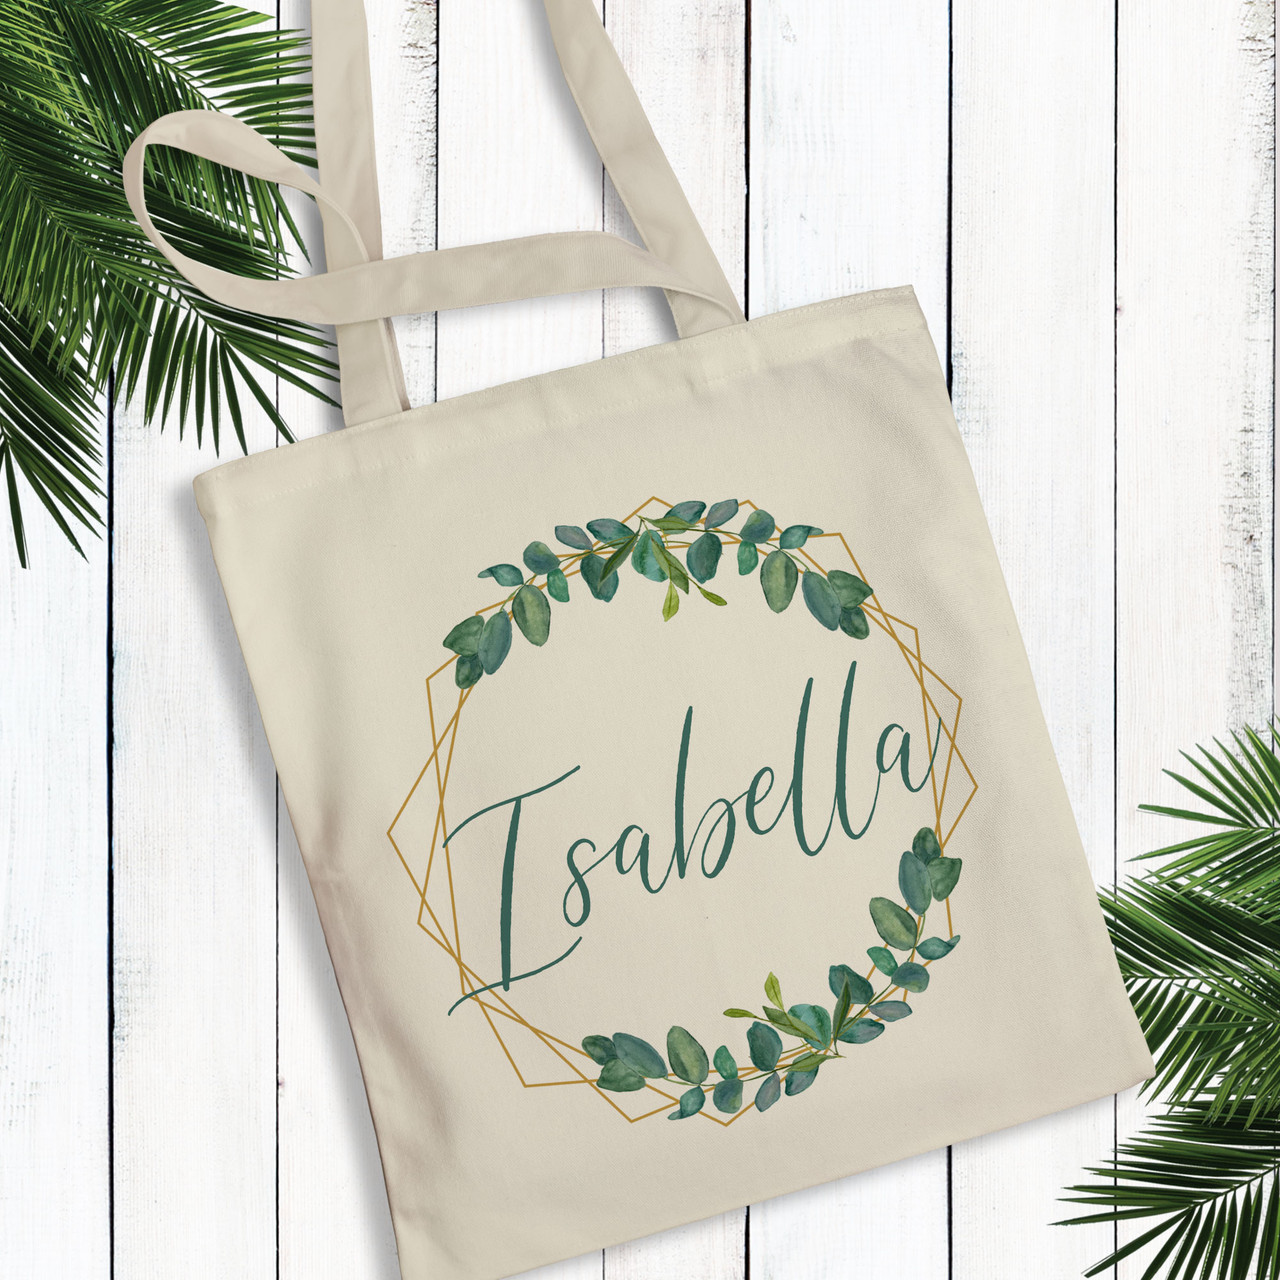 Monogrammed Tote Bags - Personalized With Custom Styles